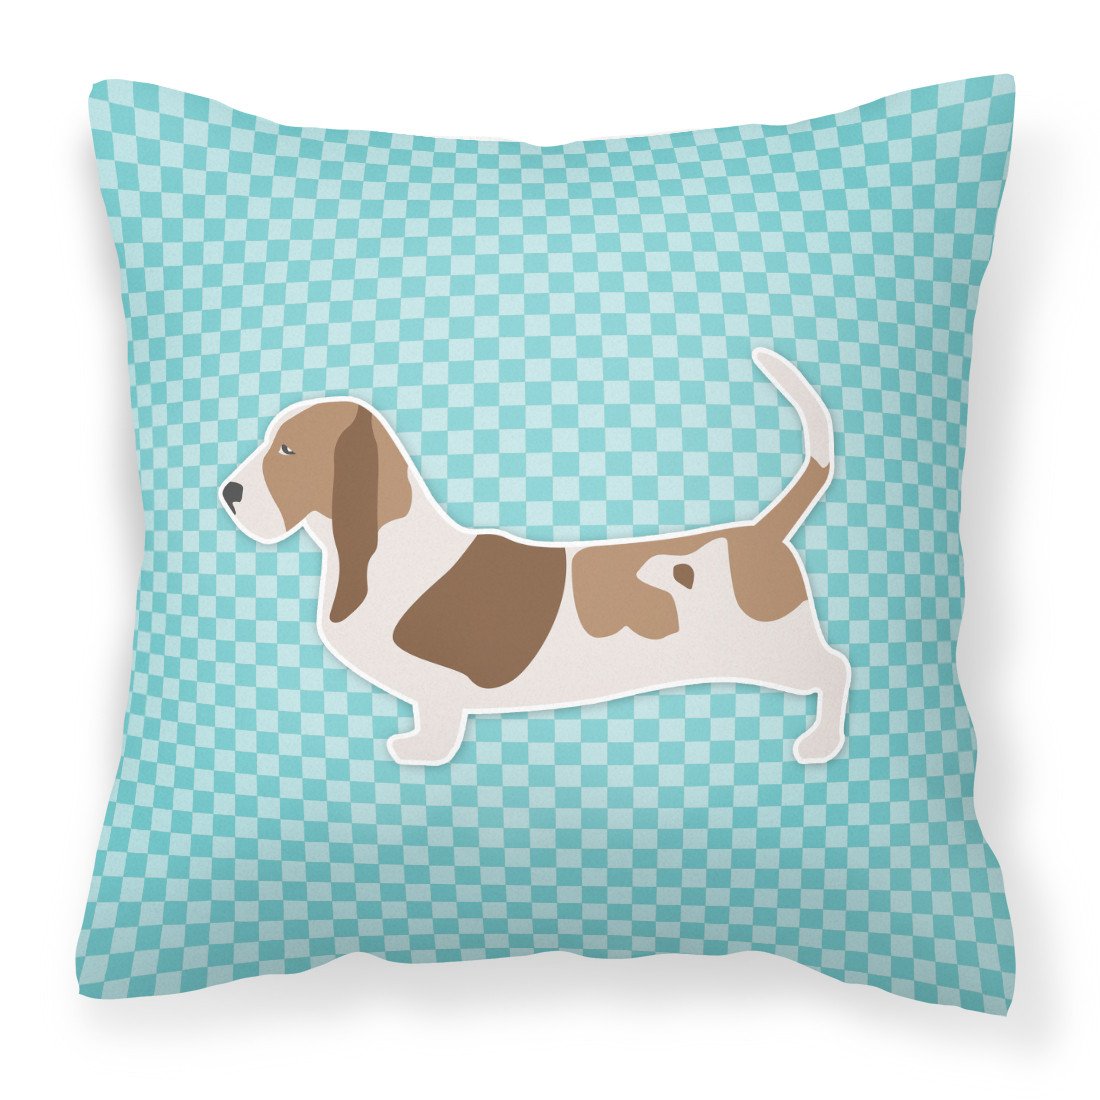 Basset Hound  Checkerboard Blue Fabric Decorative Pillow BB3702PW1818 by Caroline's Treasures